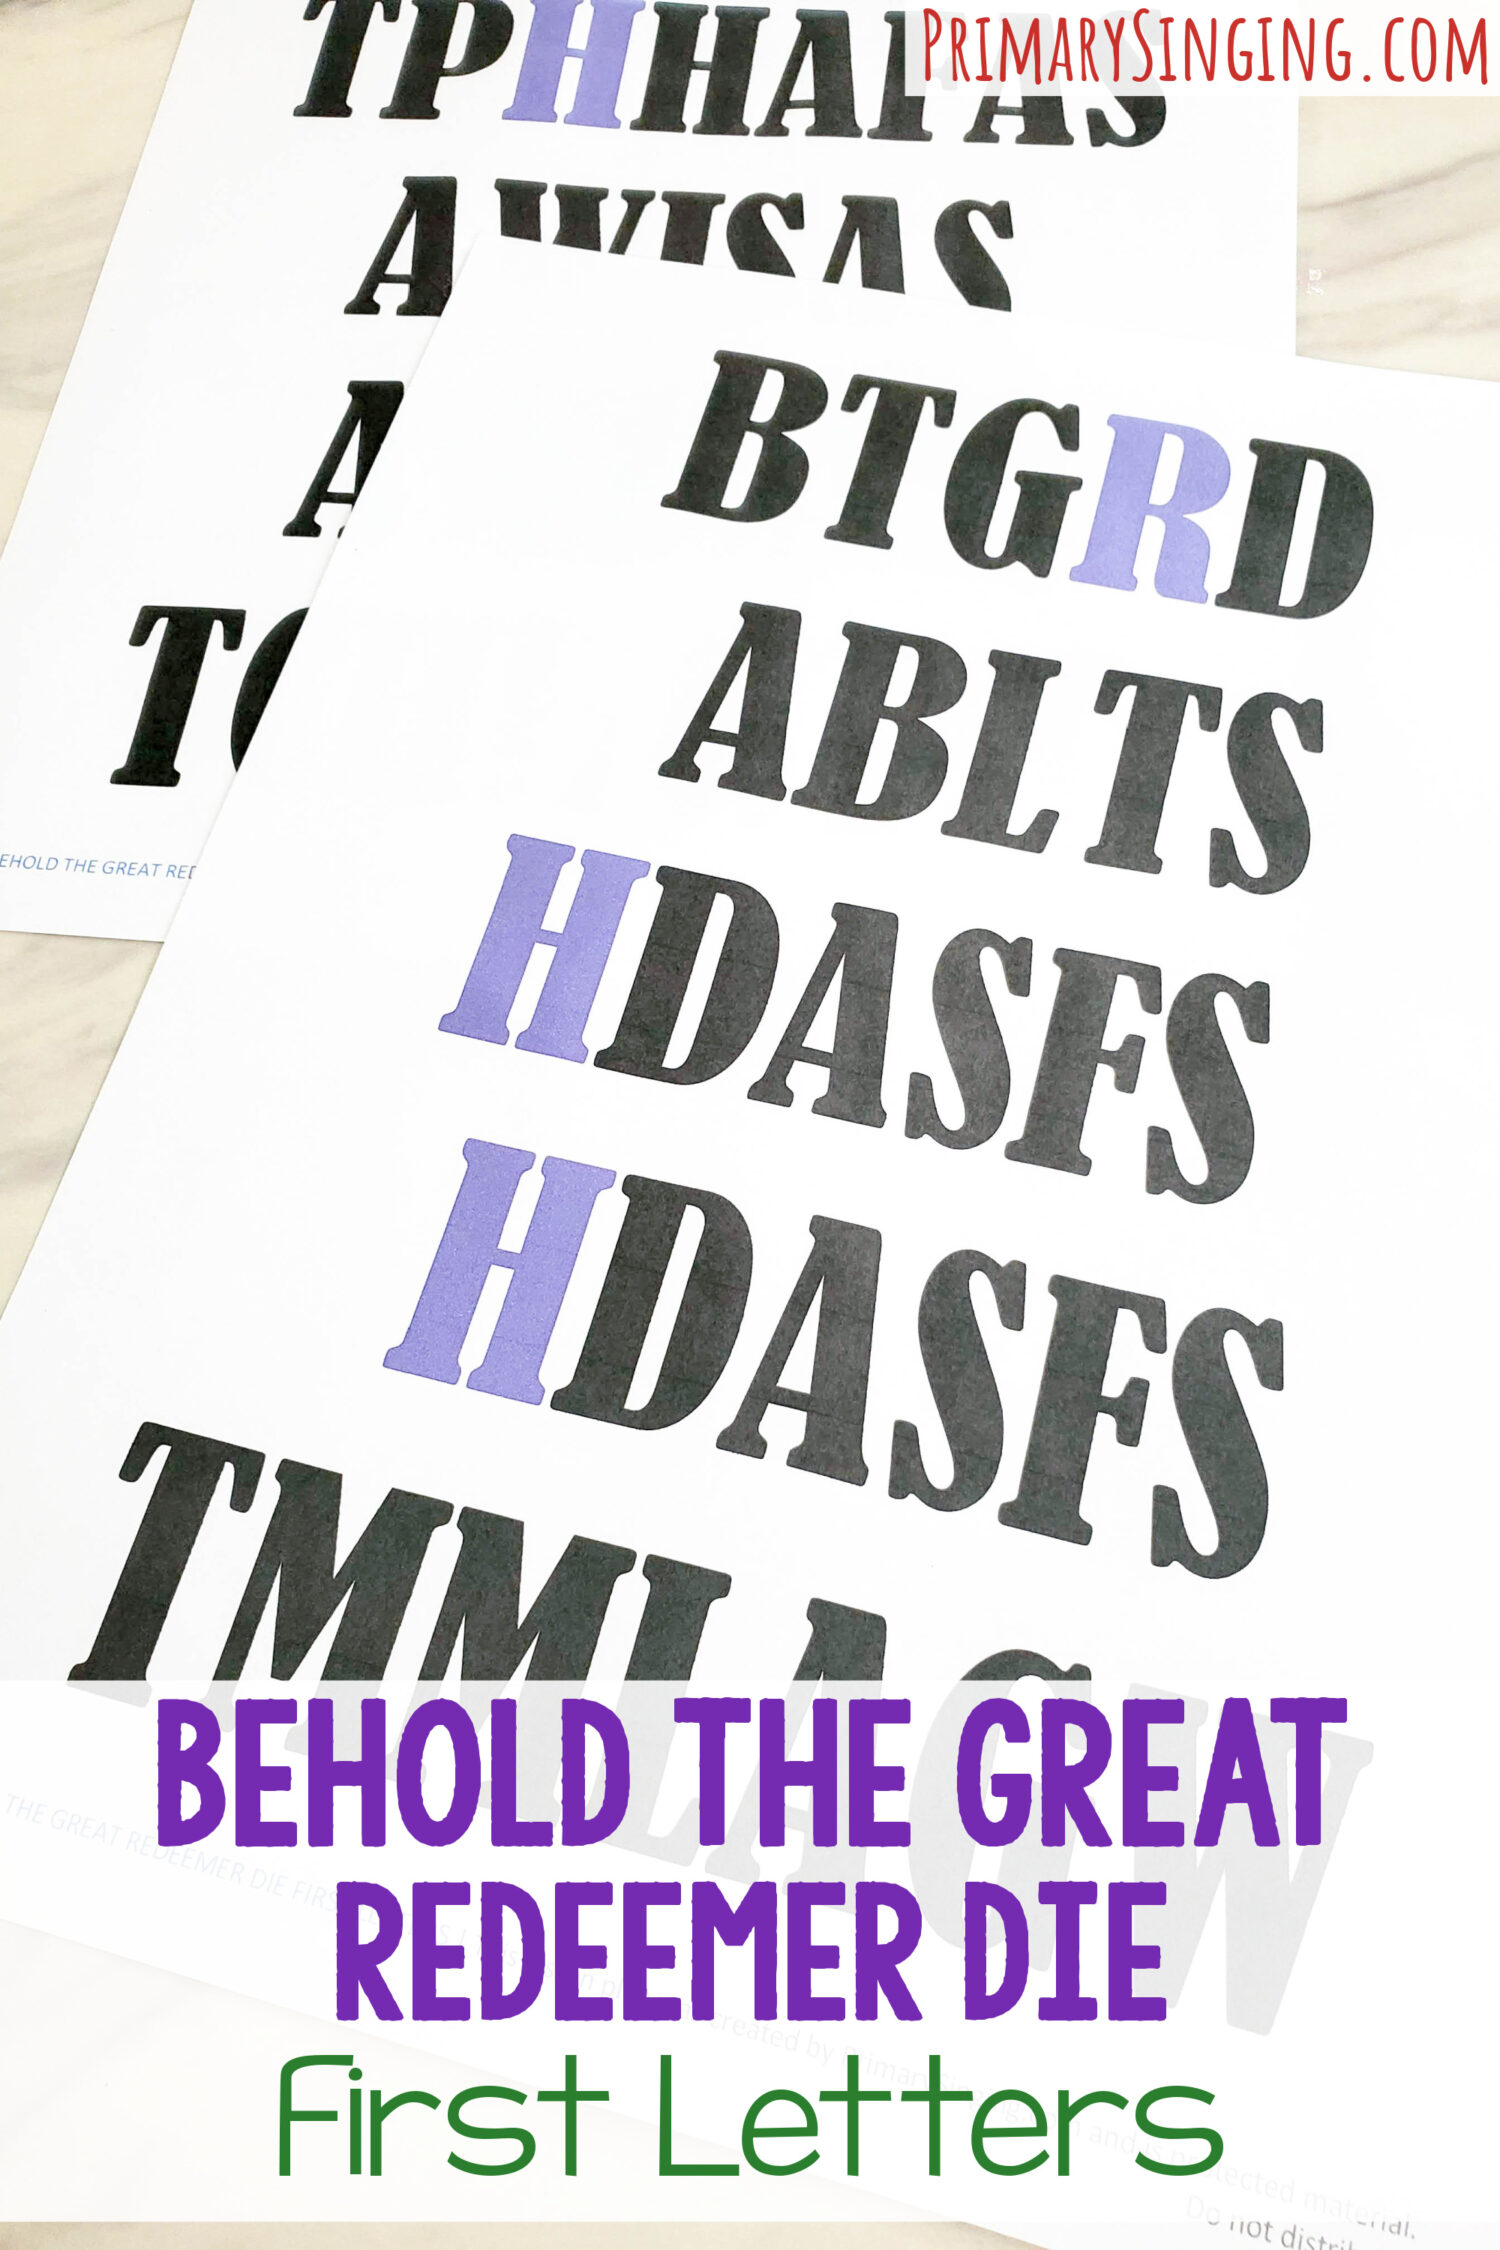 Behold the Great Redeemer Die First Letters singing time ideas - unscramble the set of first letters into the correct order then try one of the fun extension ideas. Printable song helps for LDS Primary music leaders.